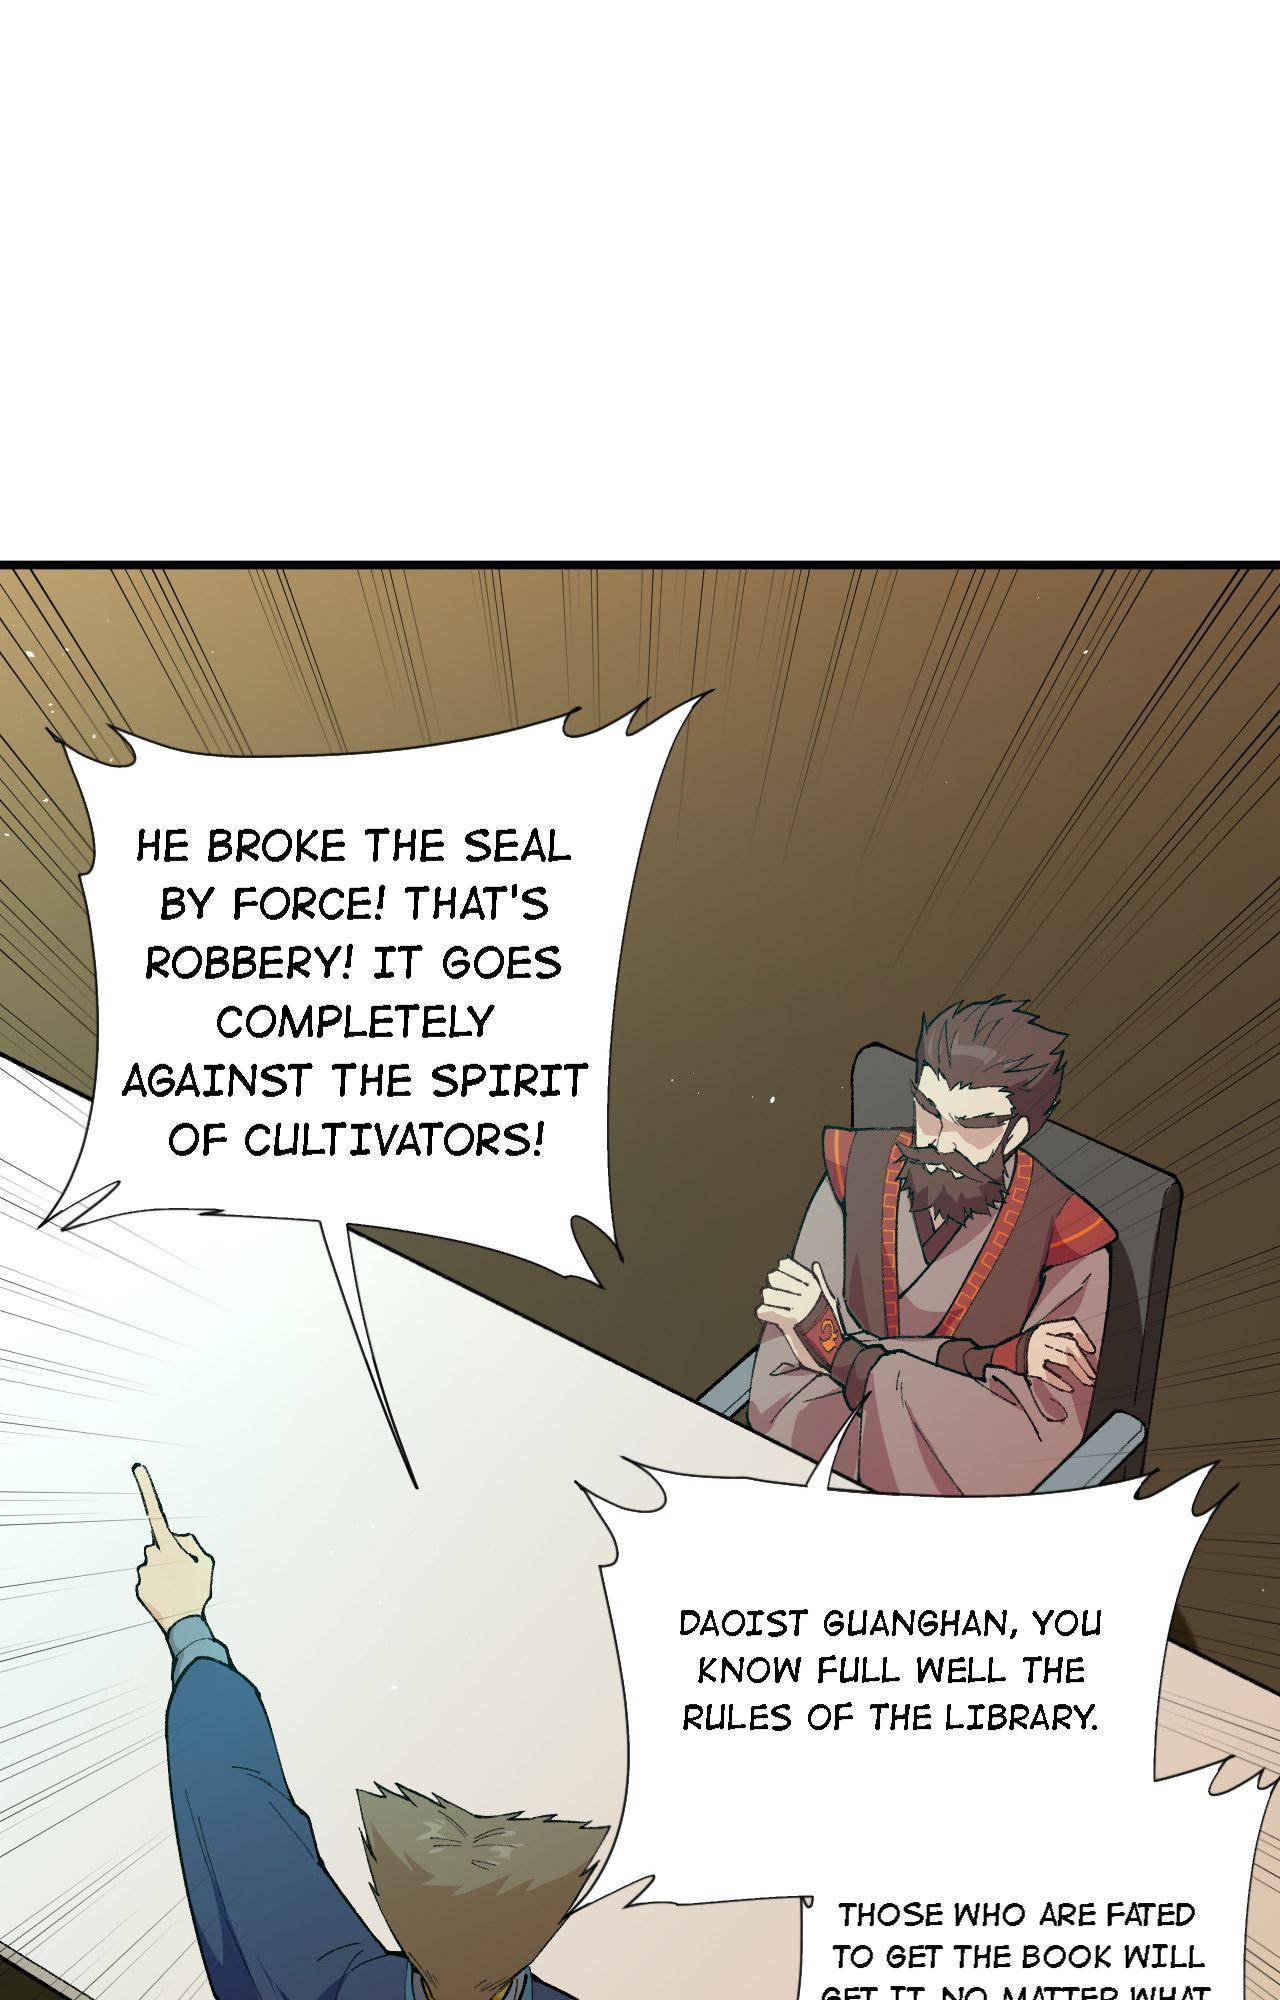 This Cultivator Came From The Future - Page 2